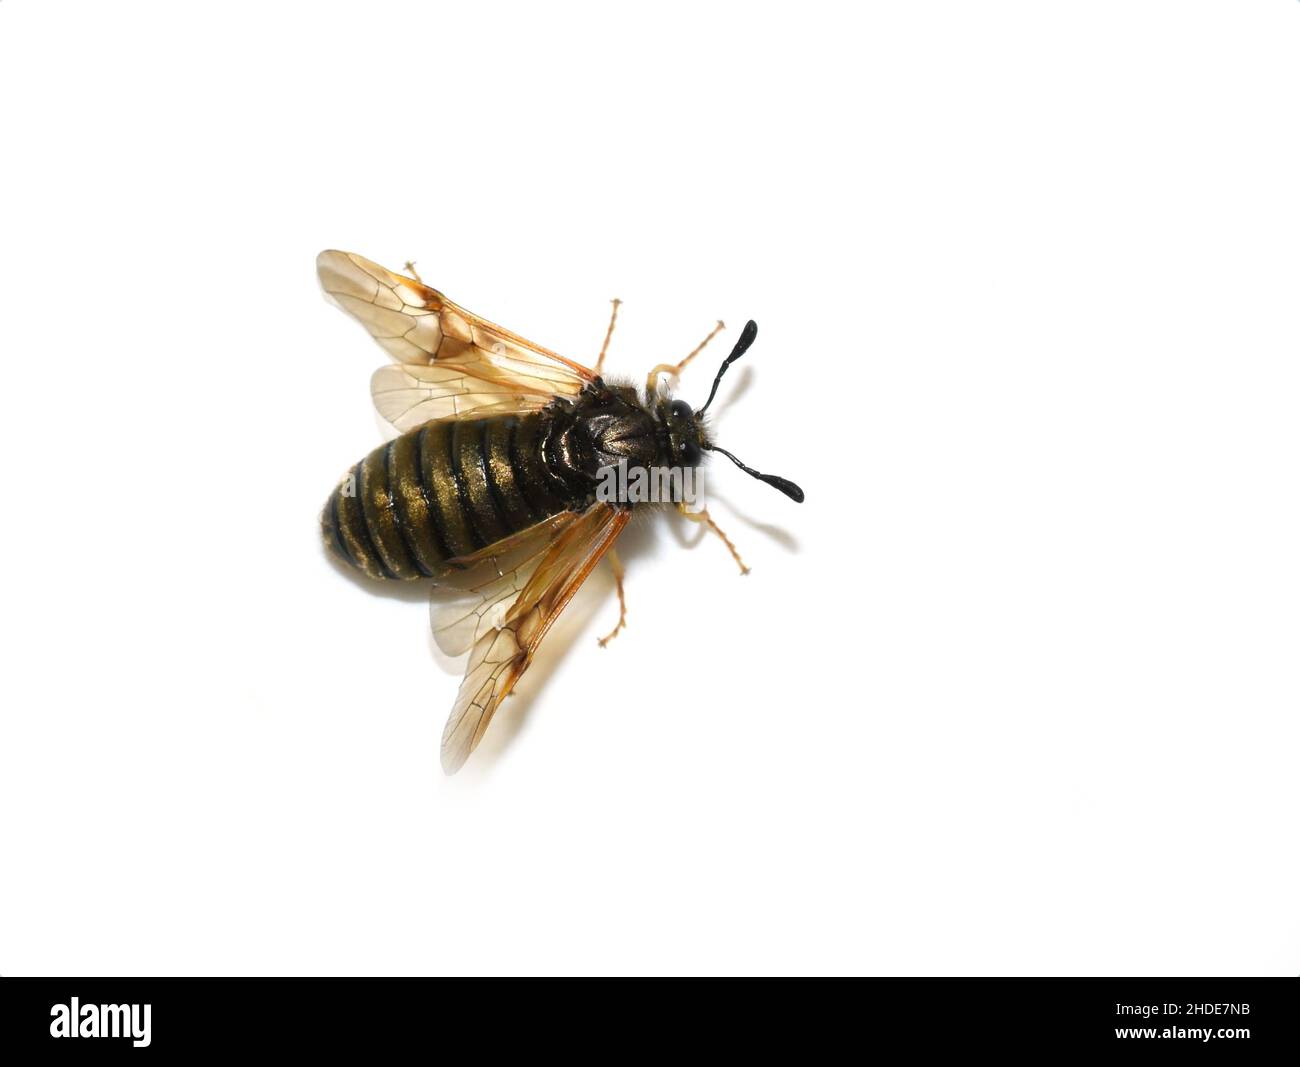 The golden and black colored striped sawfly Abia lonicerae isolated on white background Stock Photo